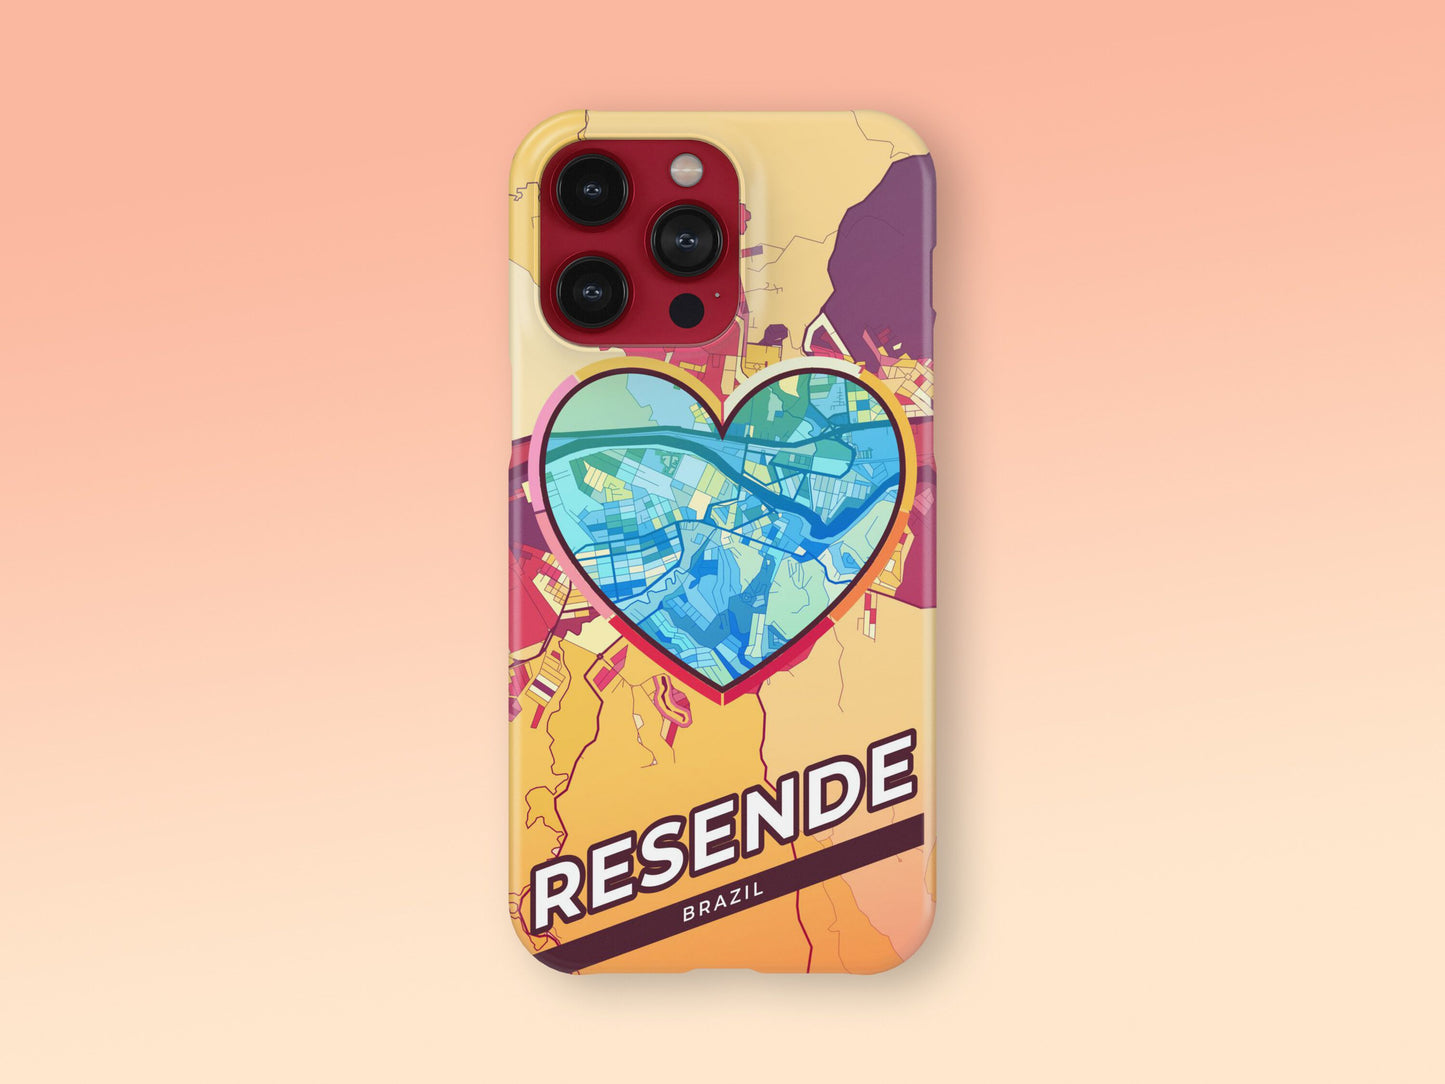 Resende Brazil slim phone case with colorful icon. Birthday, wedding or housewarming gift. Couple match cases. 2